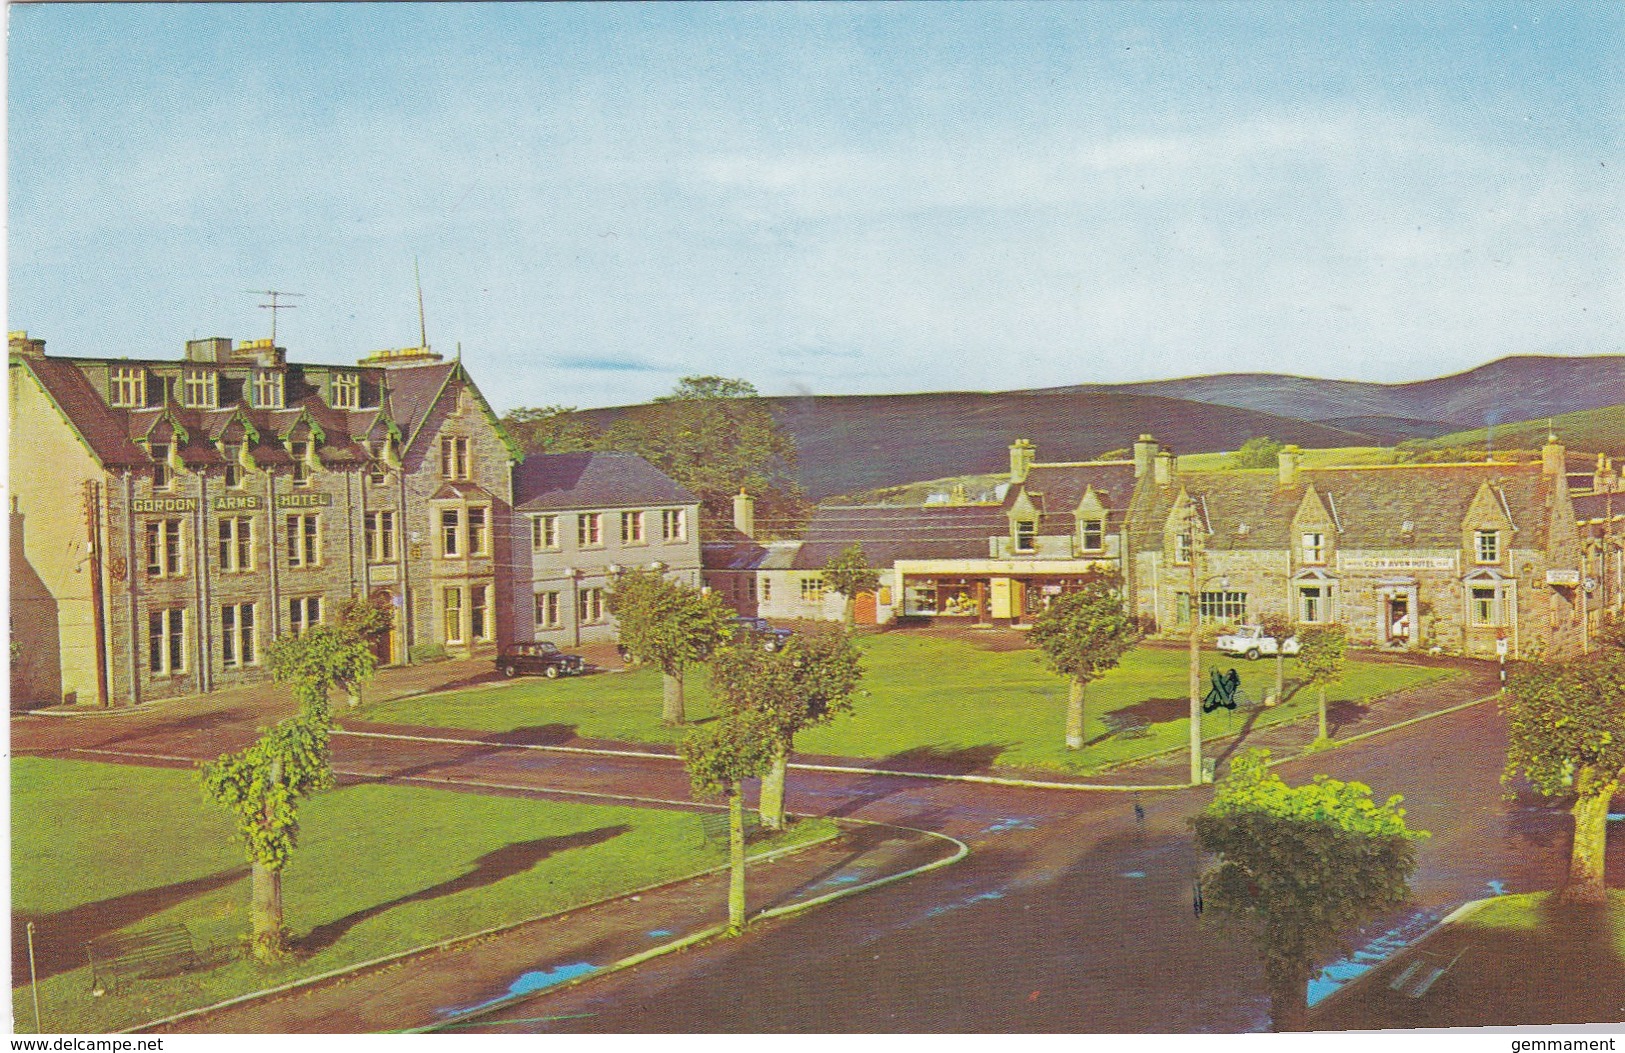 TOMINTOUL - THE SQUARE - Moray